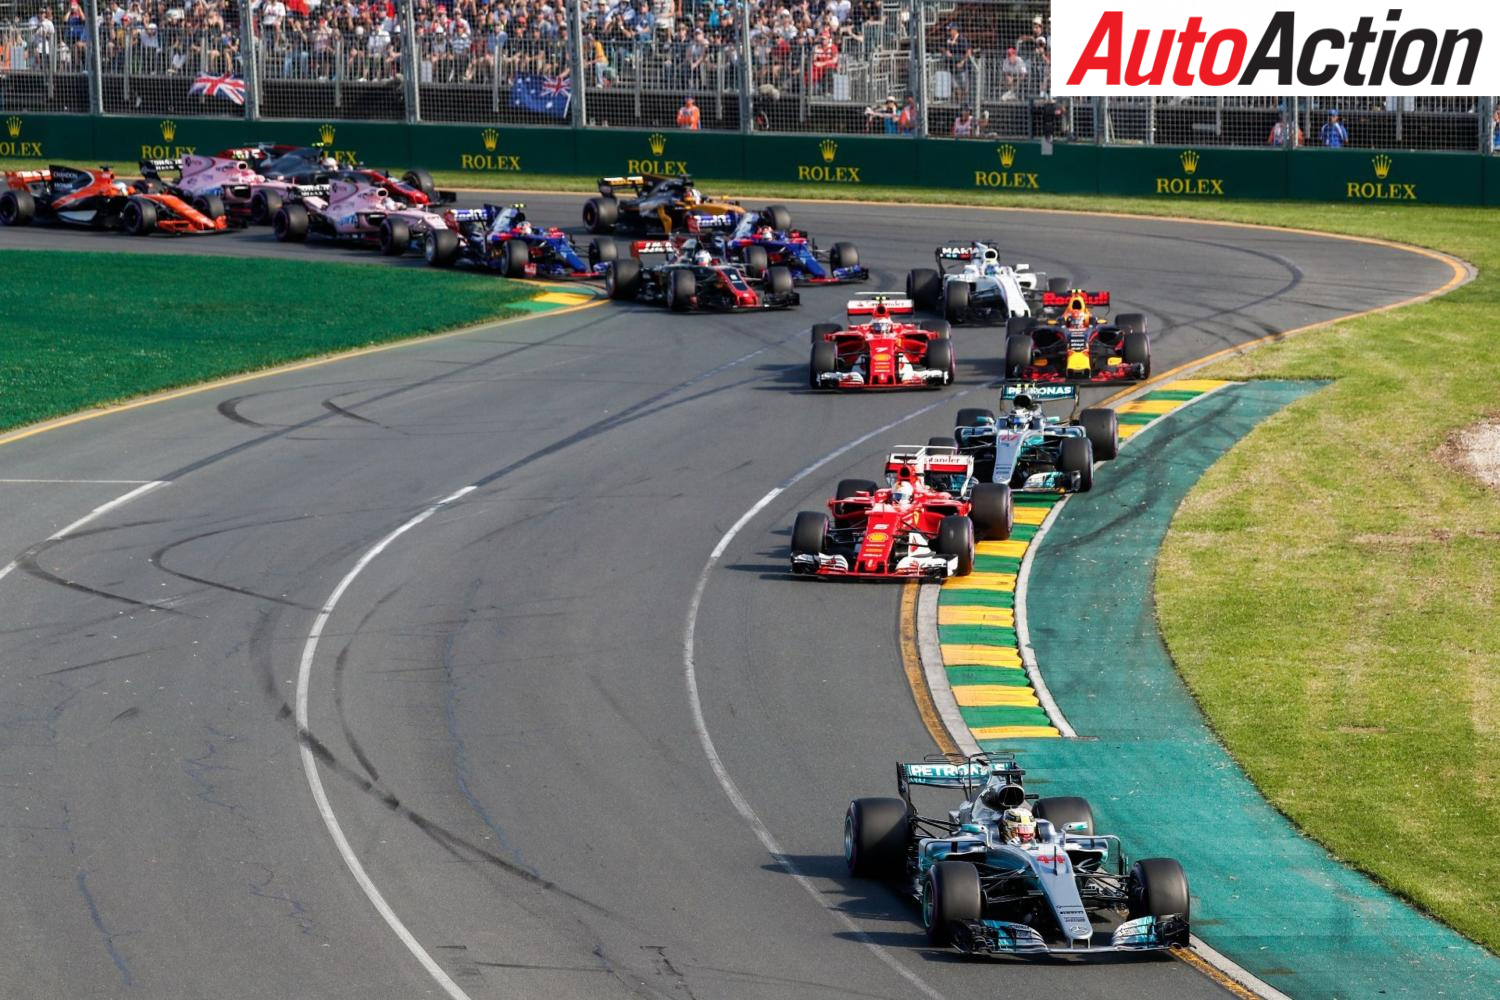 Melbourne retains it spot as the opening F1 race of the year - Photo: LAT